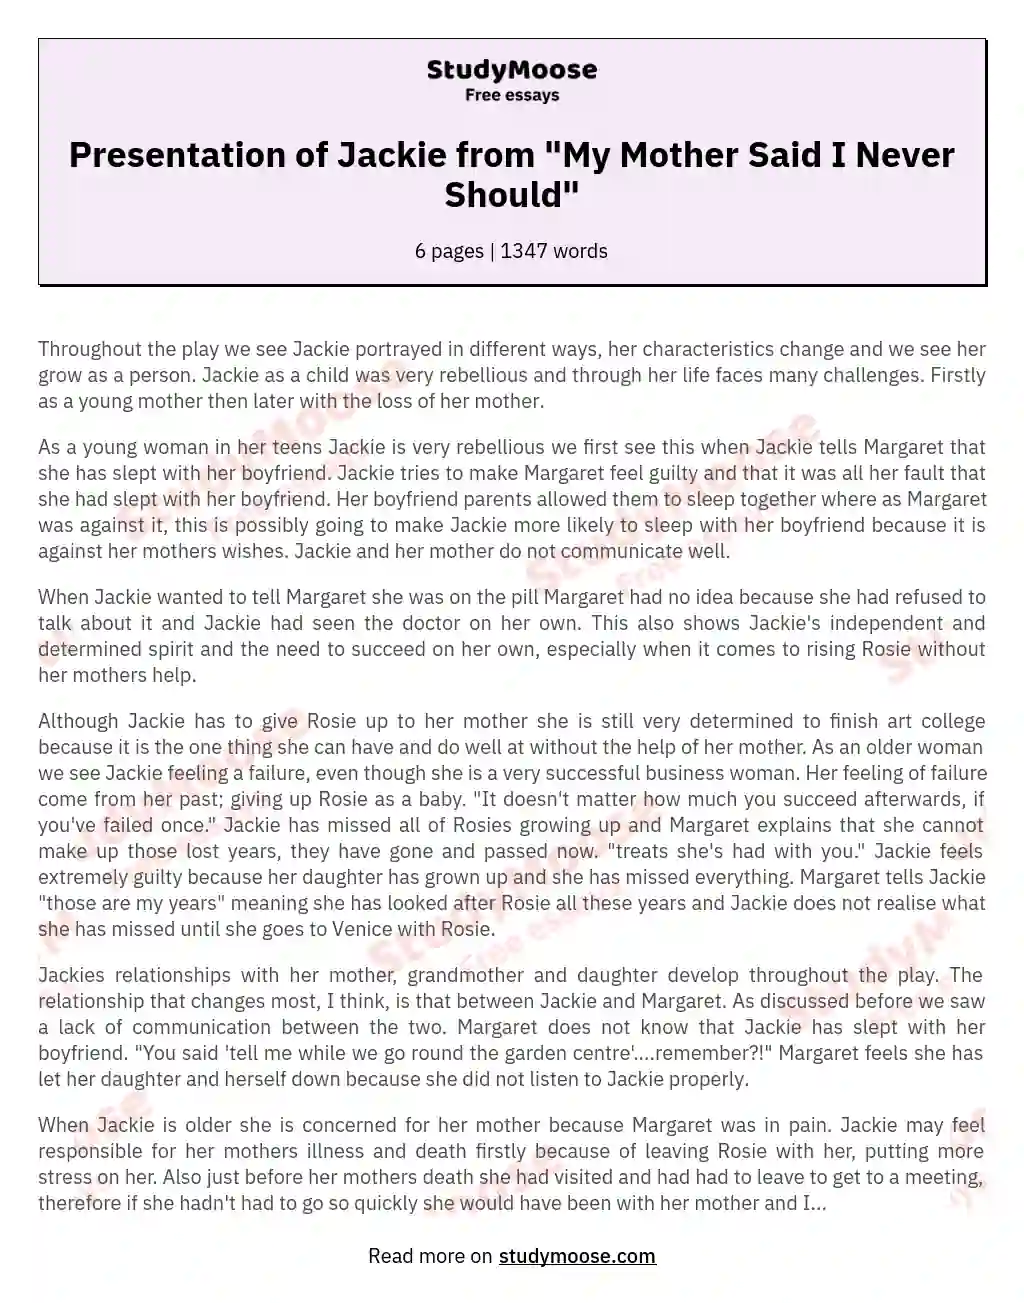 Presentation of Jackie from "My Mother Said I Never Should"